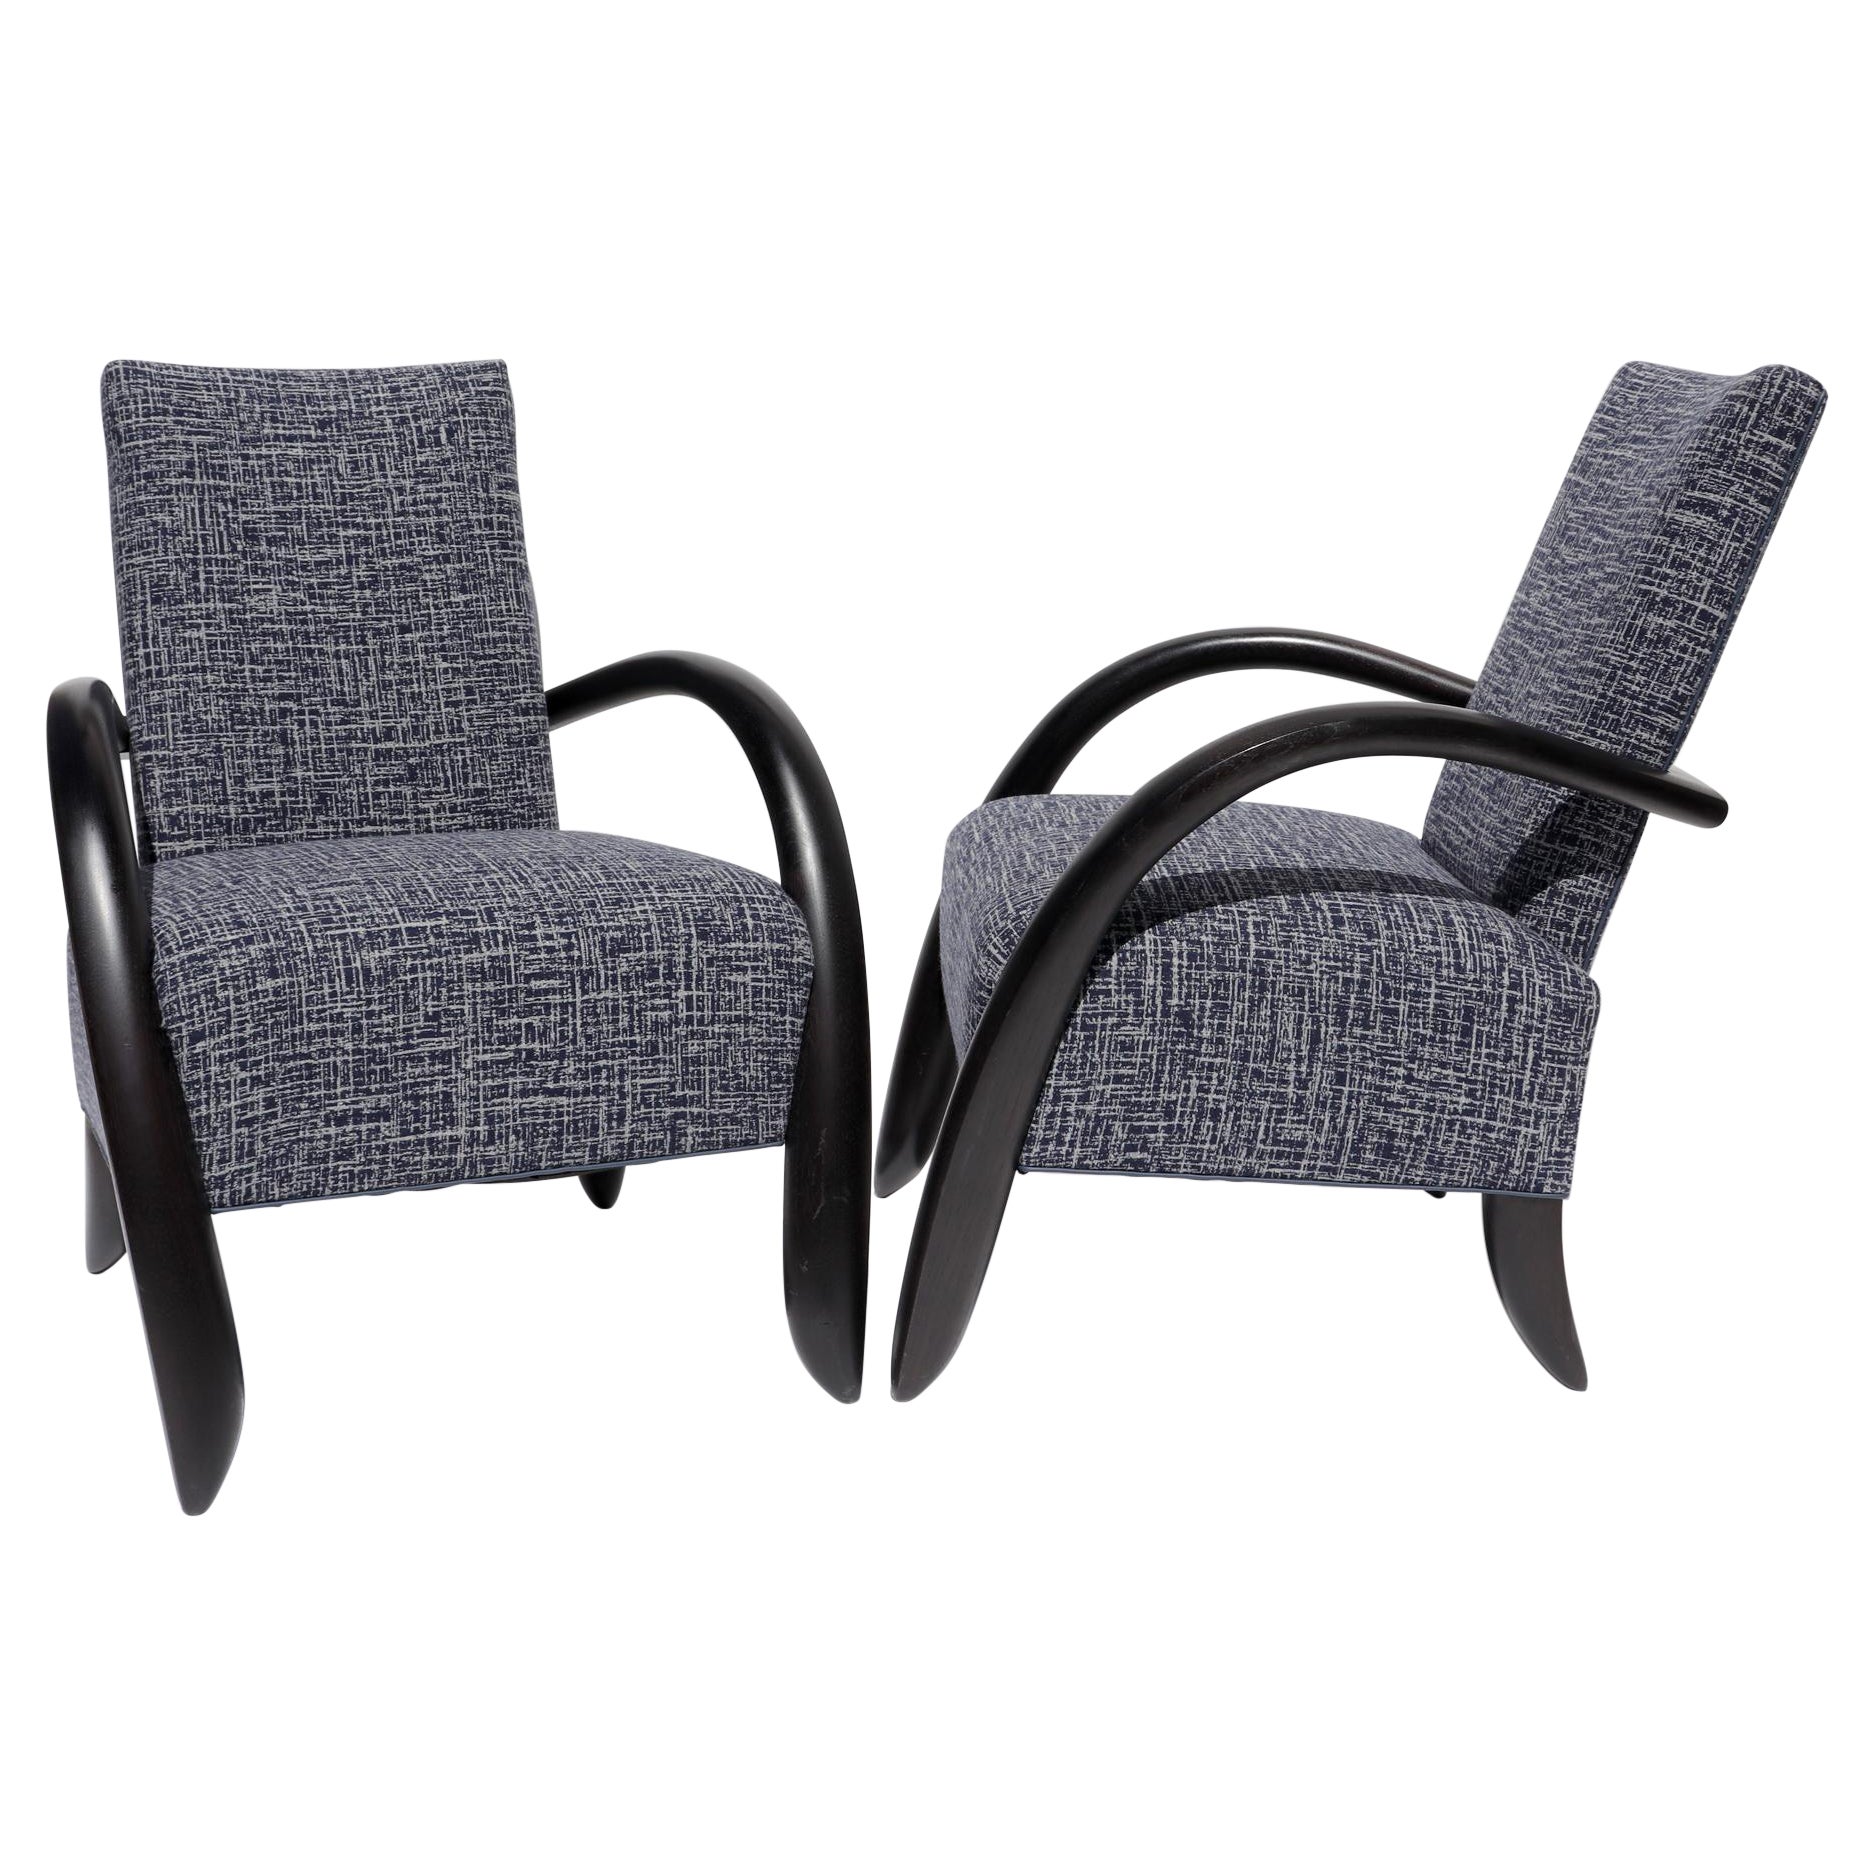 Wendell Castle Cloud Lounge Chairs Pair